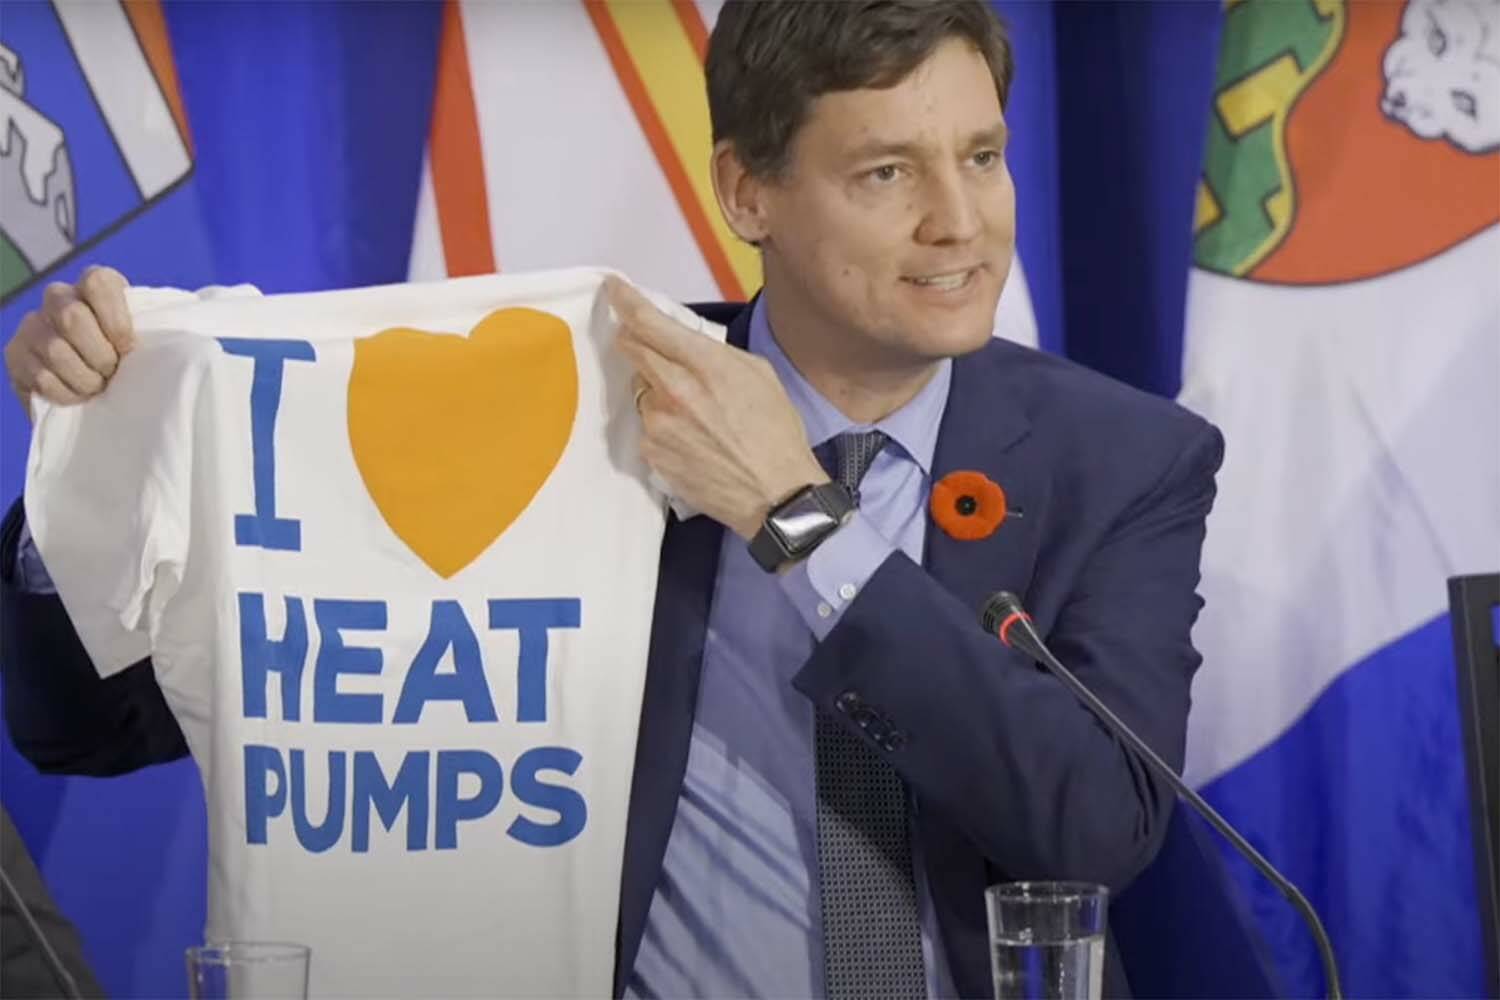 Premier David Eby, seen here in Nova Scotia, warns against playing affordability off against climate change. During a meeting with federal and territorial leaders in Nova Scotia he held up an “I Heart Heat Pumps” T-shirt during interviews. (Screencap)